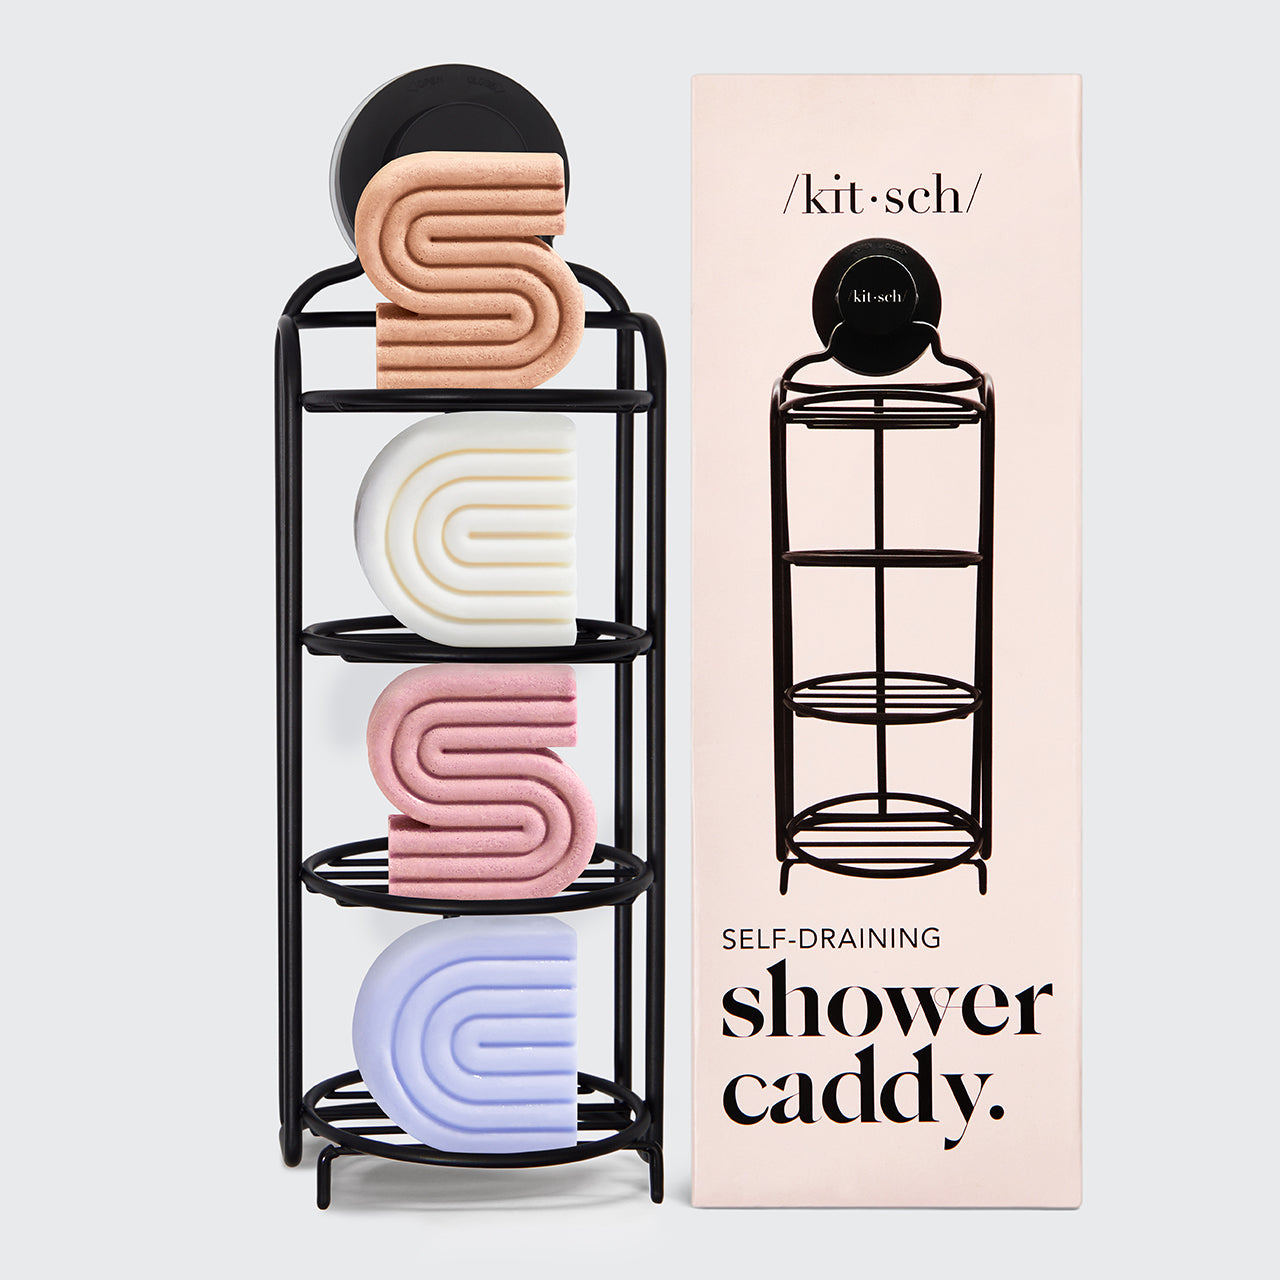  Kitsch Self Draining Shower Caddy and Bottle Free